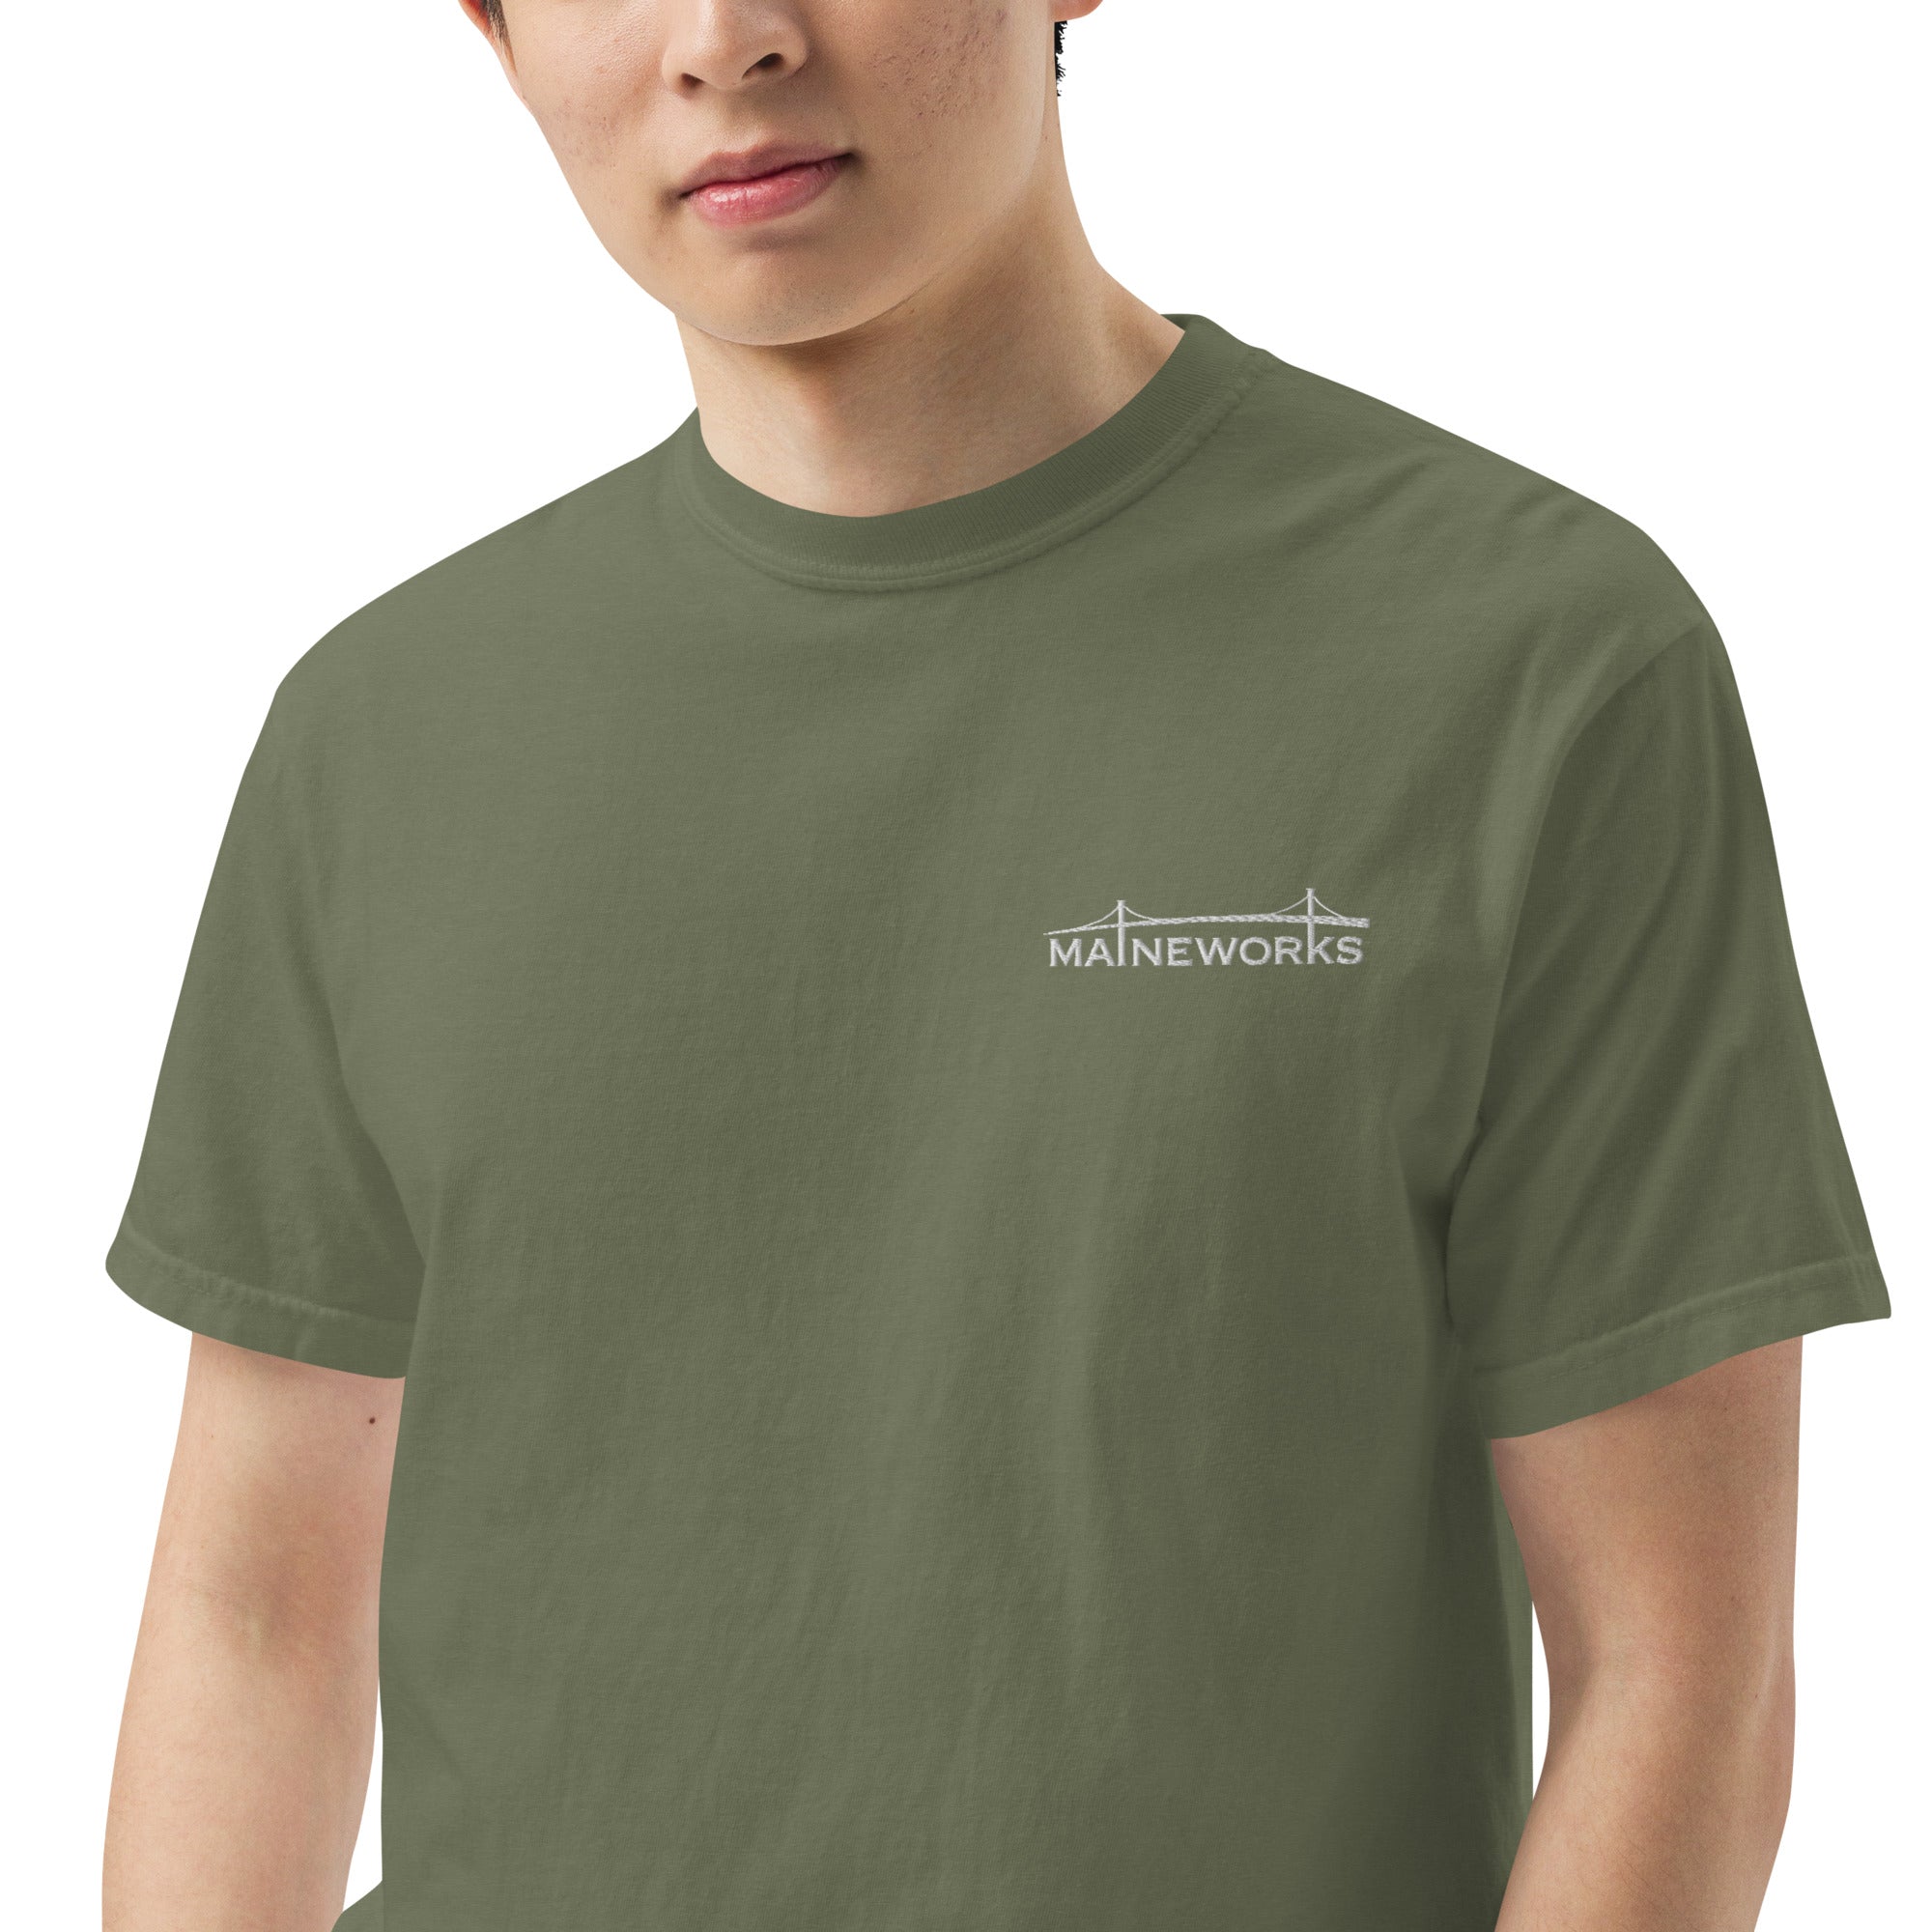 MaineWorks Comfort Colors embroidered t-shirt (this one is NICE)